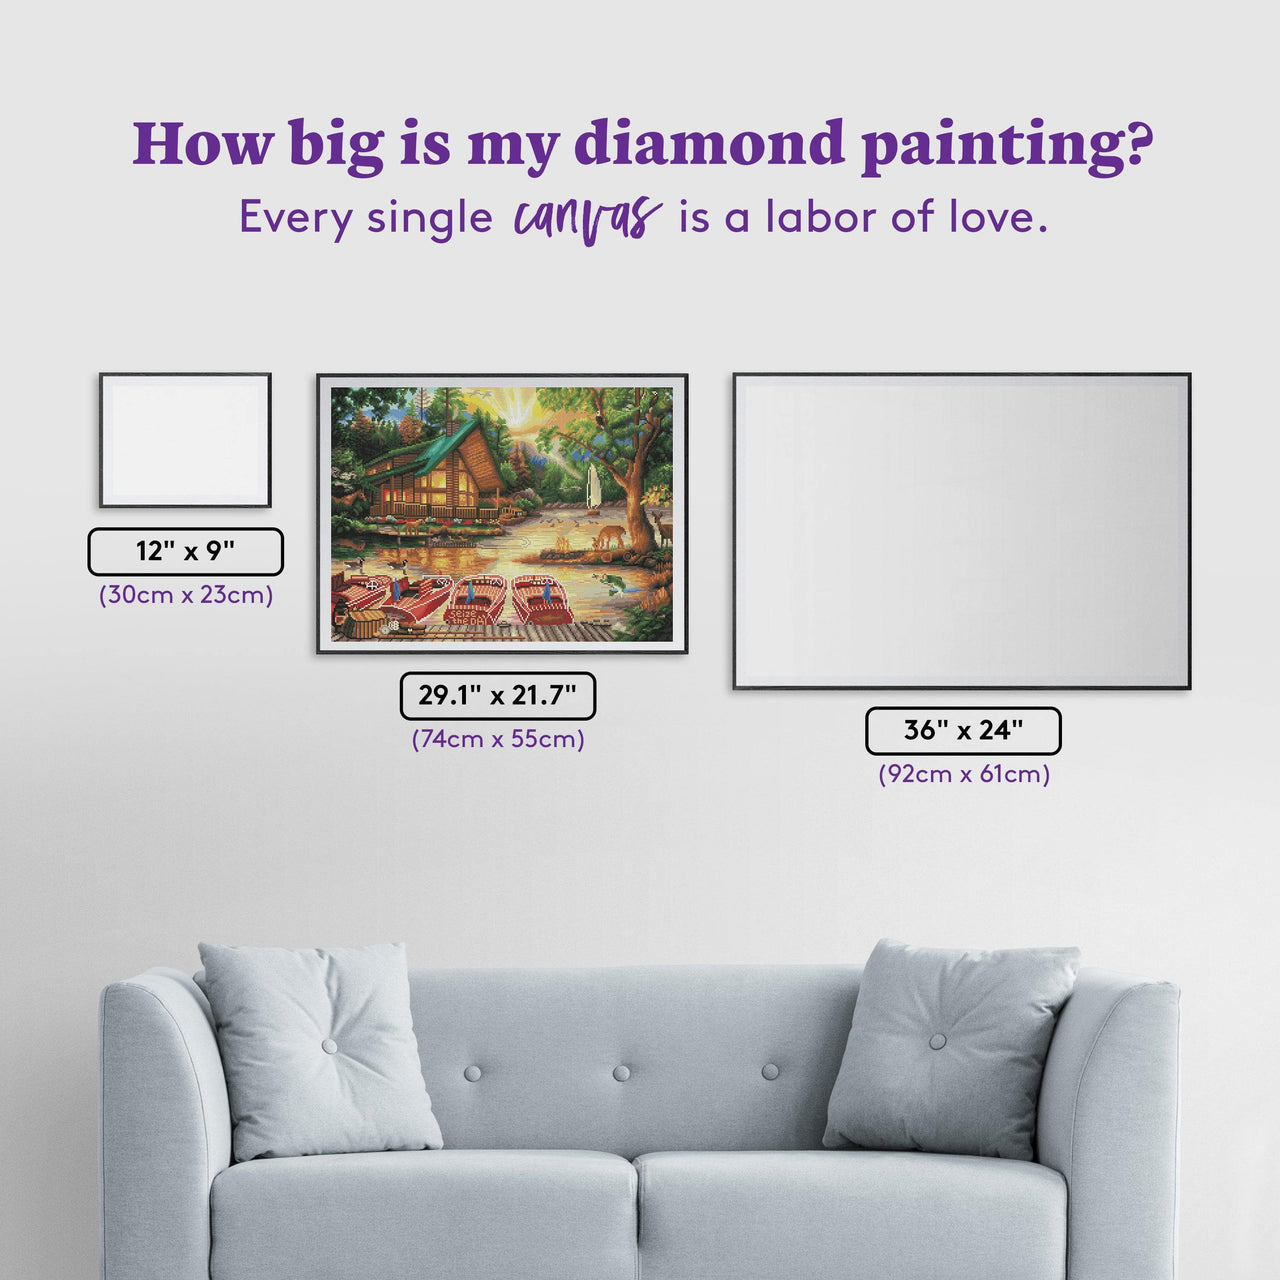 Diamond Painting Seize the Day 29.1″ x 21.7" (74cm x 55cm) / Round With 46 Colors Including 3 ABs / 56,964